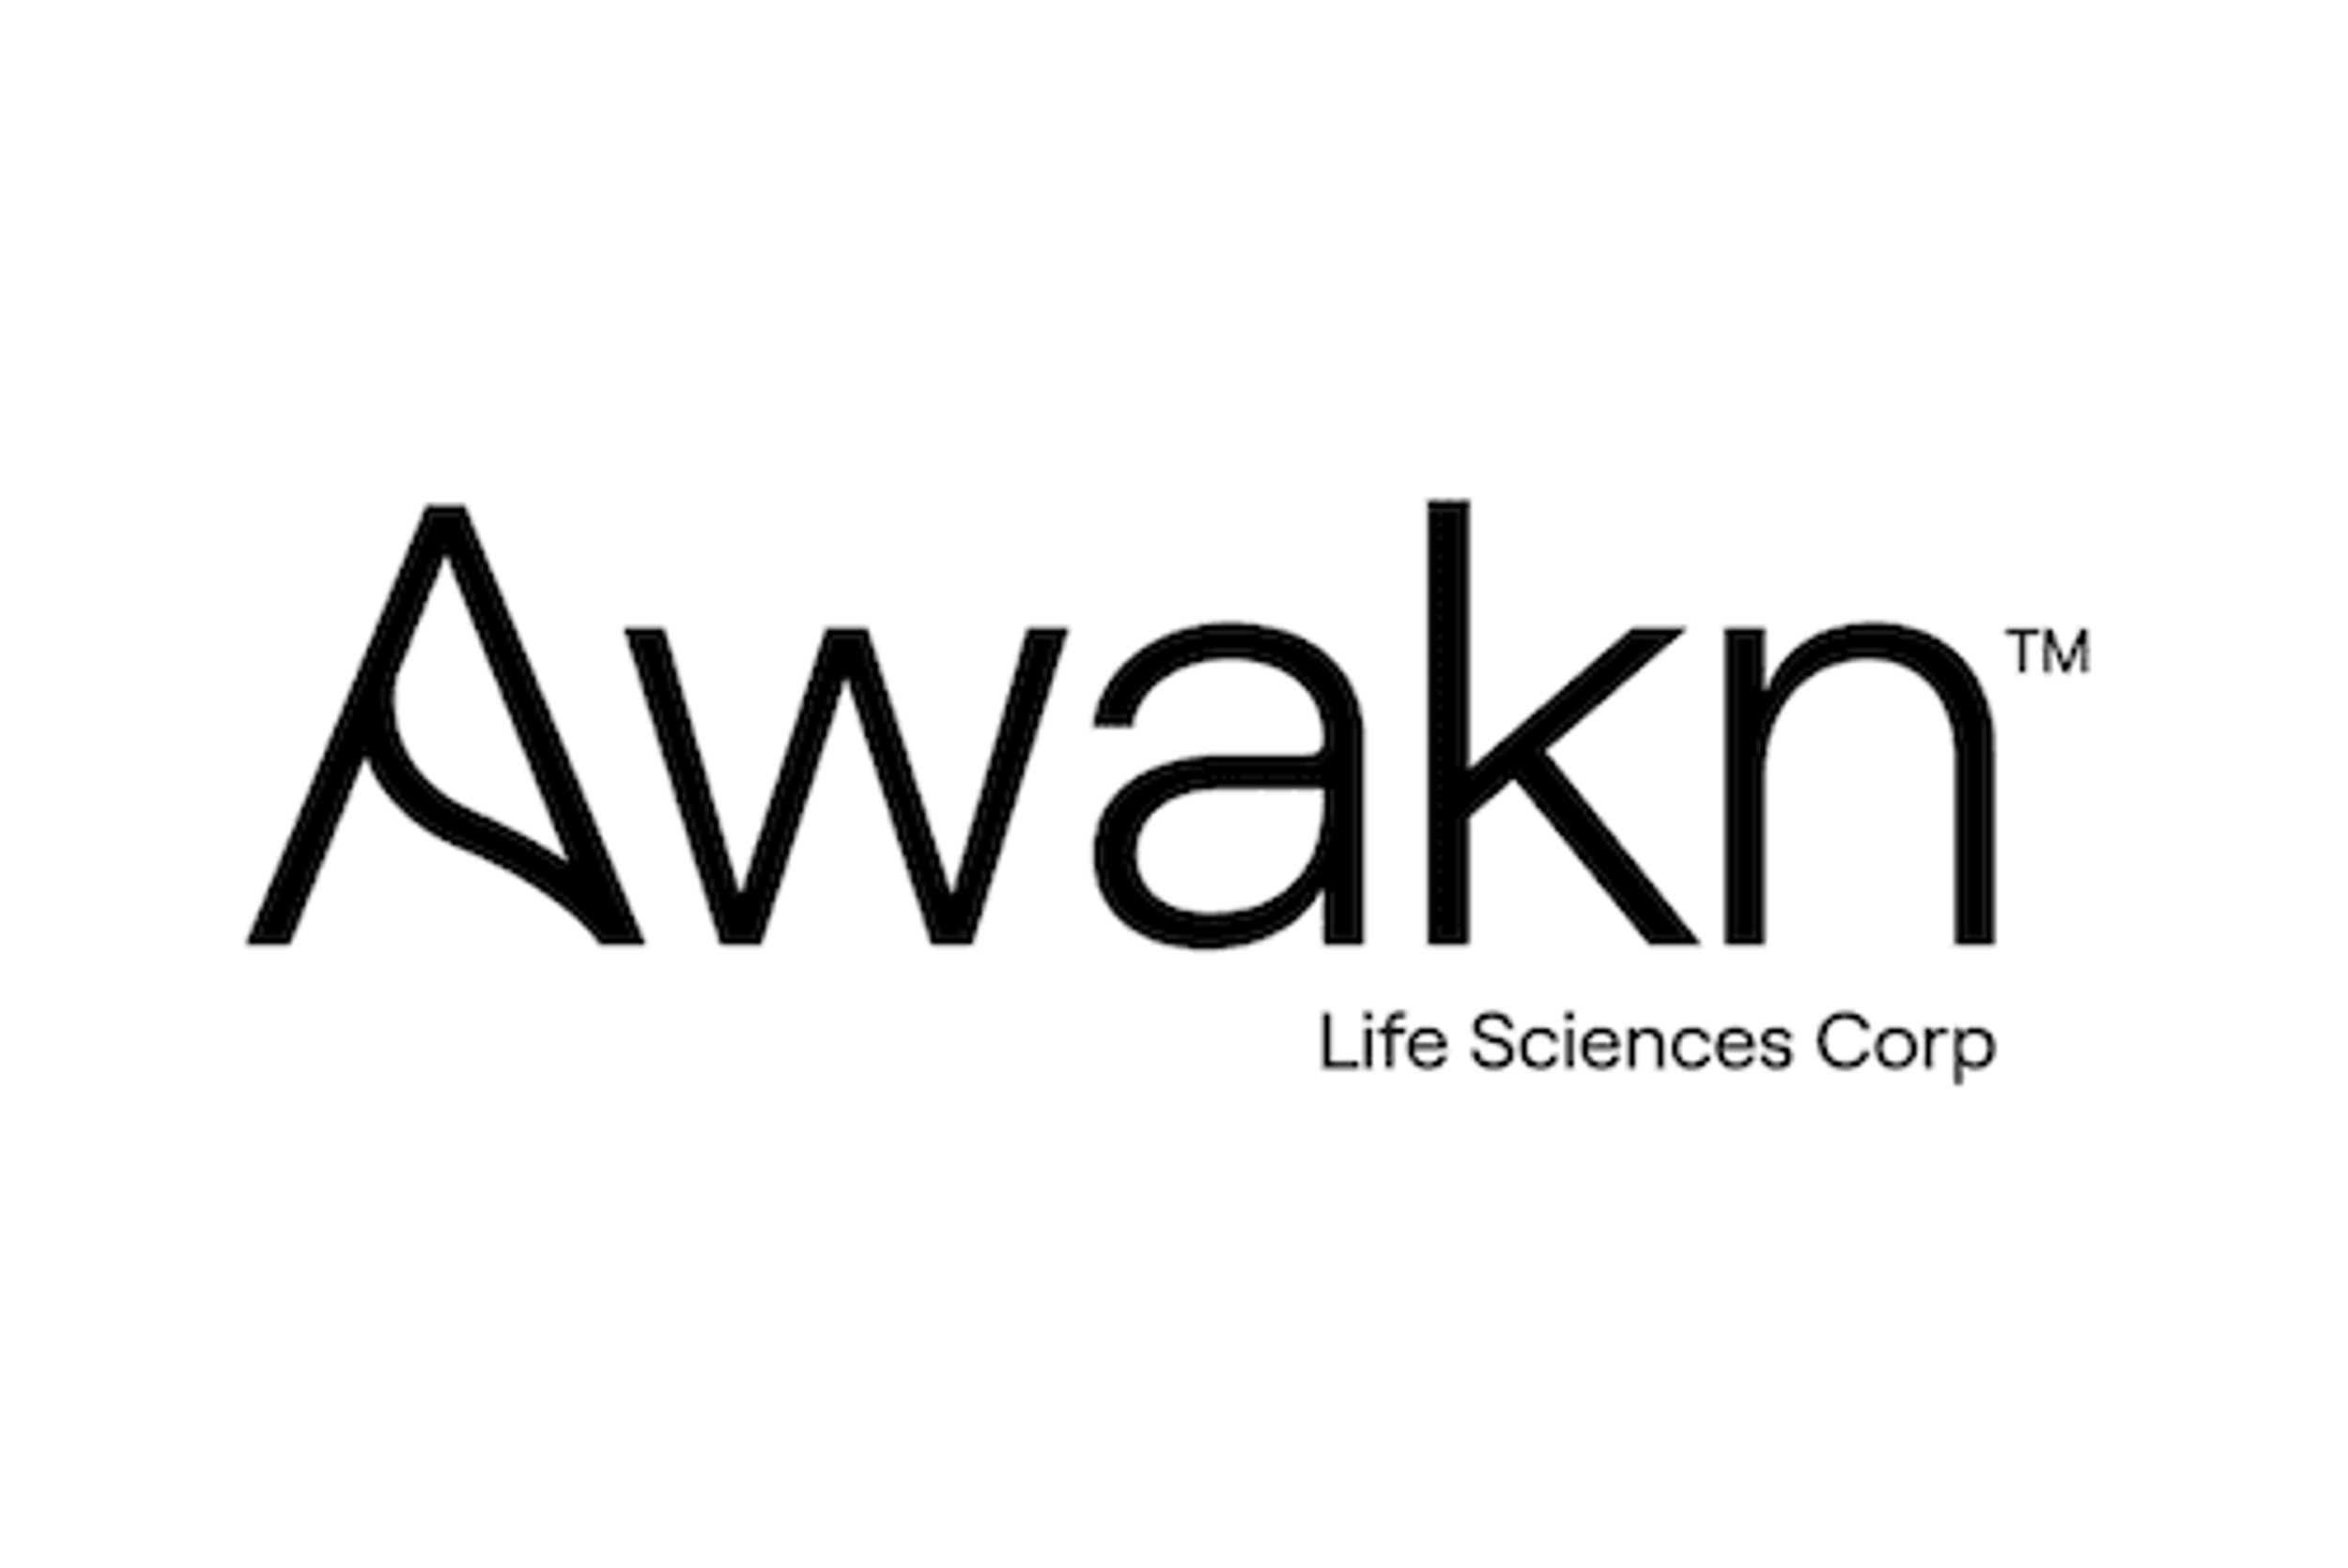 Awakn Life Sciences Announces Voluntary Lock-up Agreement Extension with Management, Board of Directors and Key Shareholders